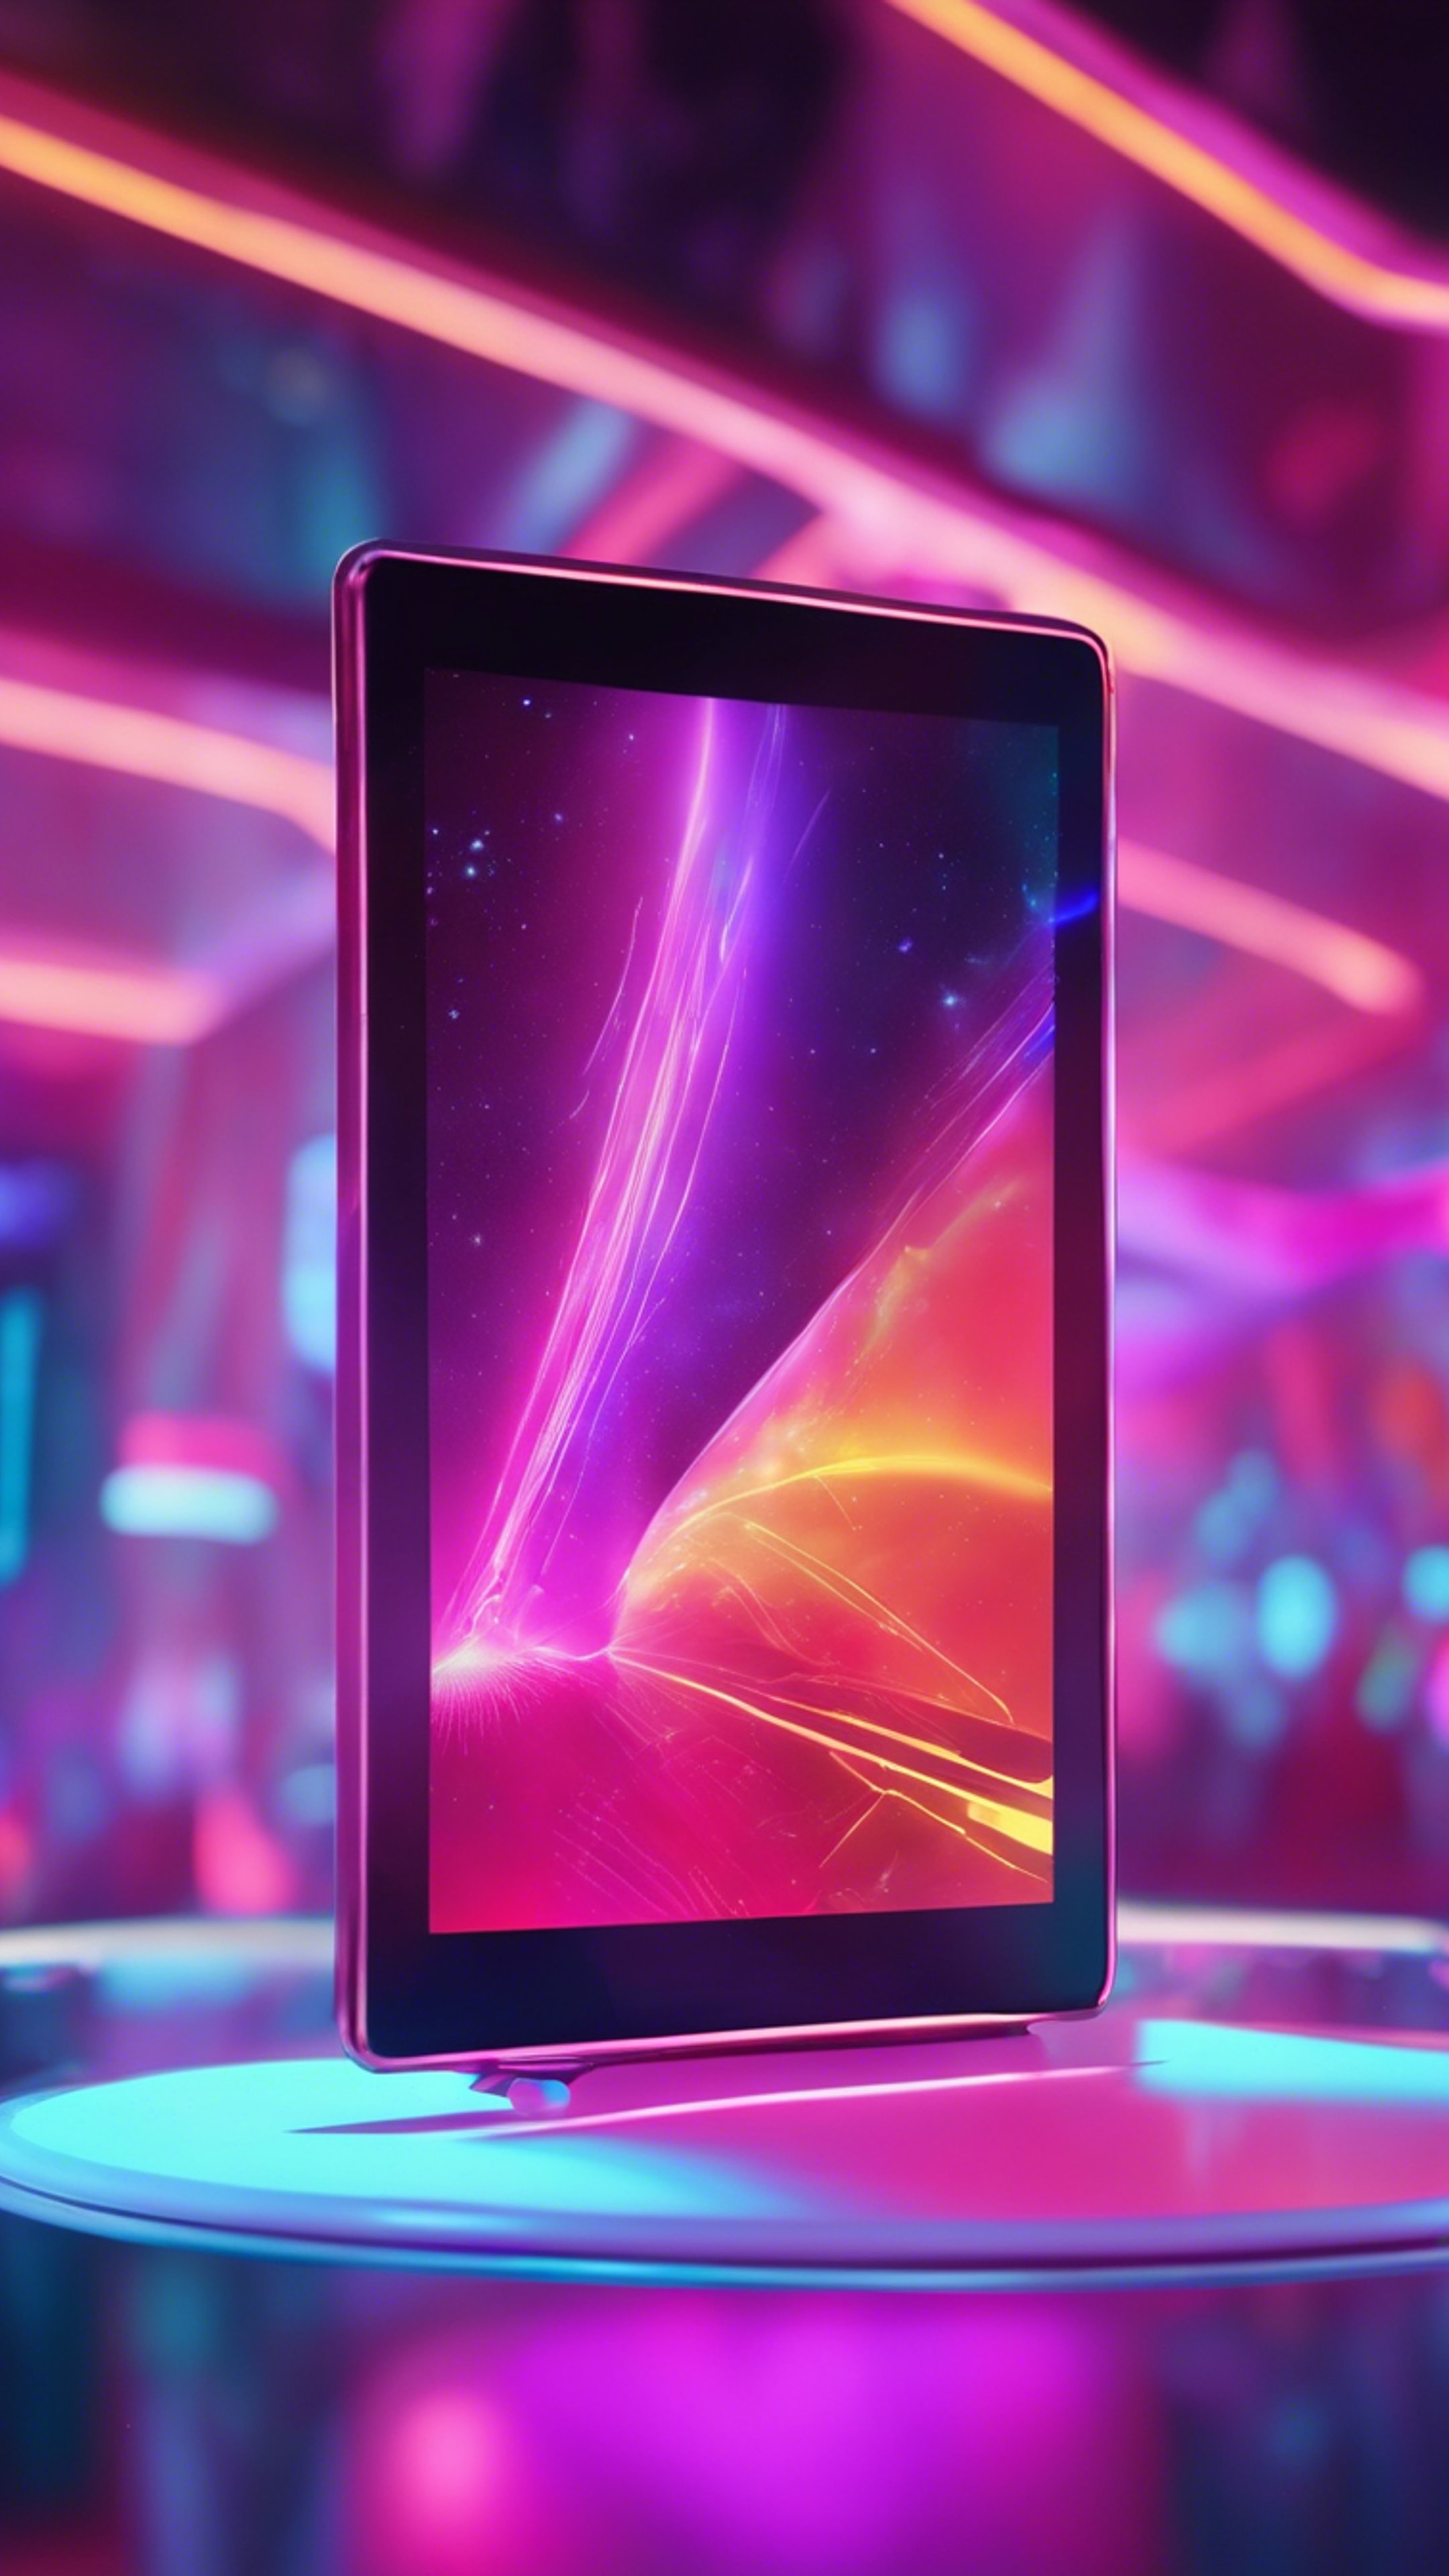 An ultra-modern tablet with a holographic touch screen floating in a futuristic, vividly colored neon environment. Tapeta[25bfd648fdfb4eaf80d5]